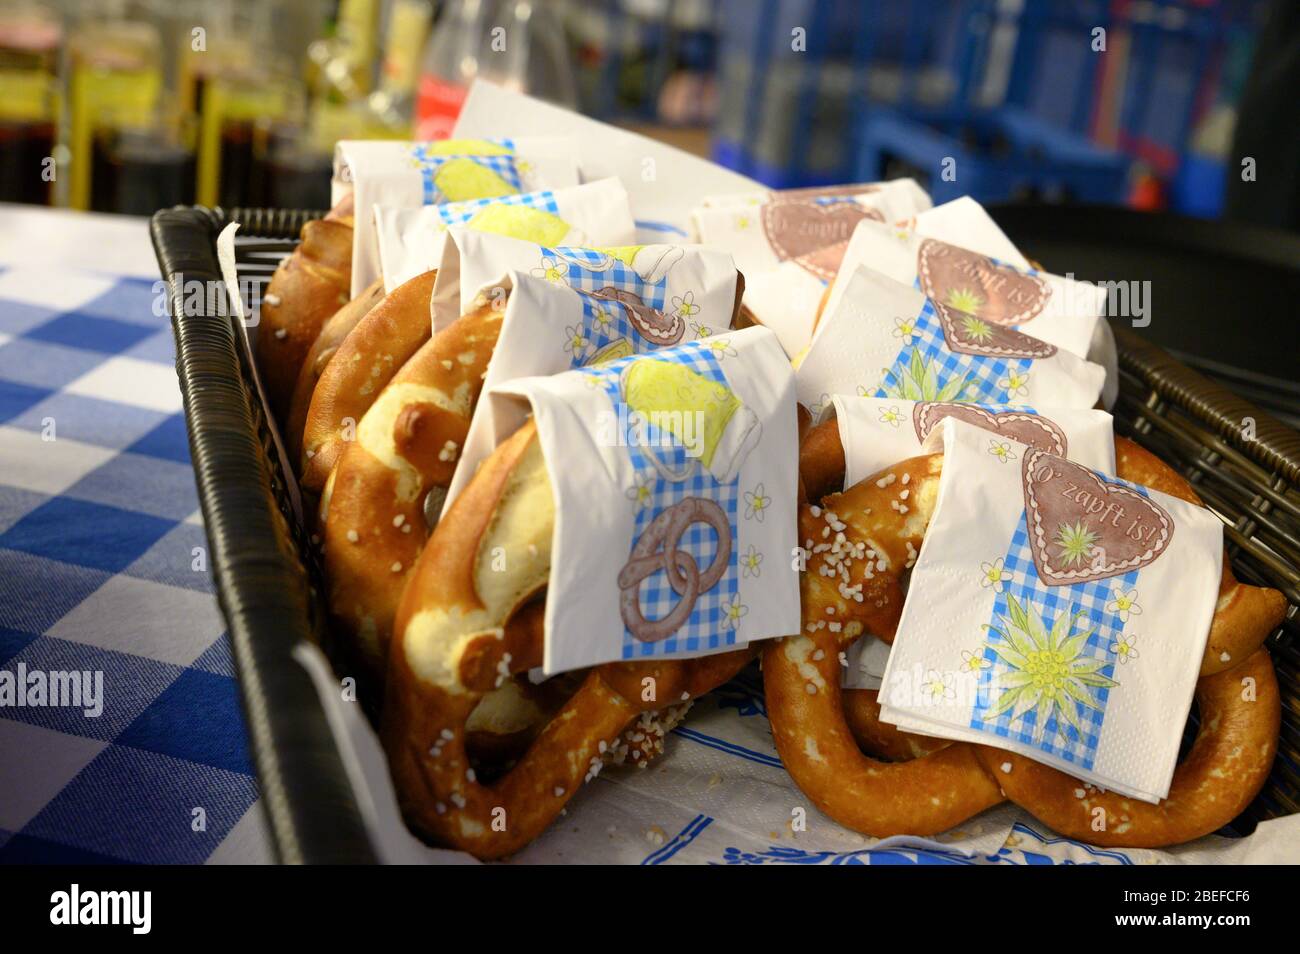 A stack of Bavarian pretzels on a blue checkered table at an Oktoberfest celebration in Germany, Europe, Bavaria Stock Photo